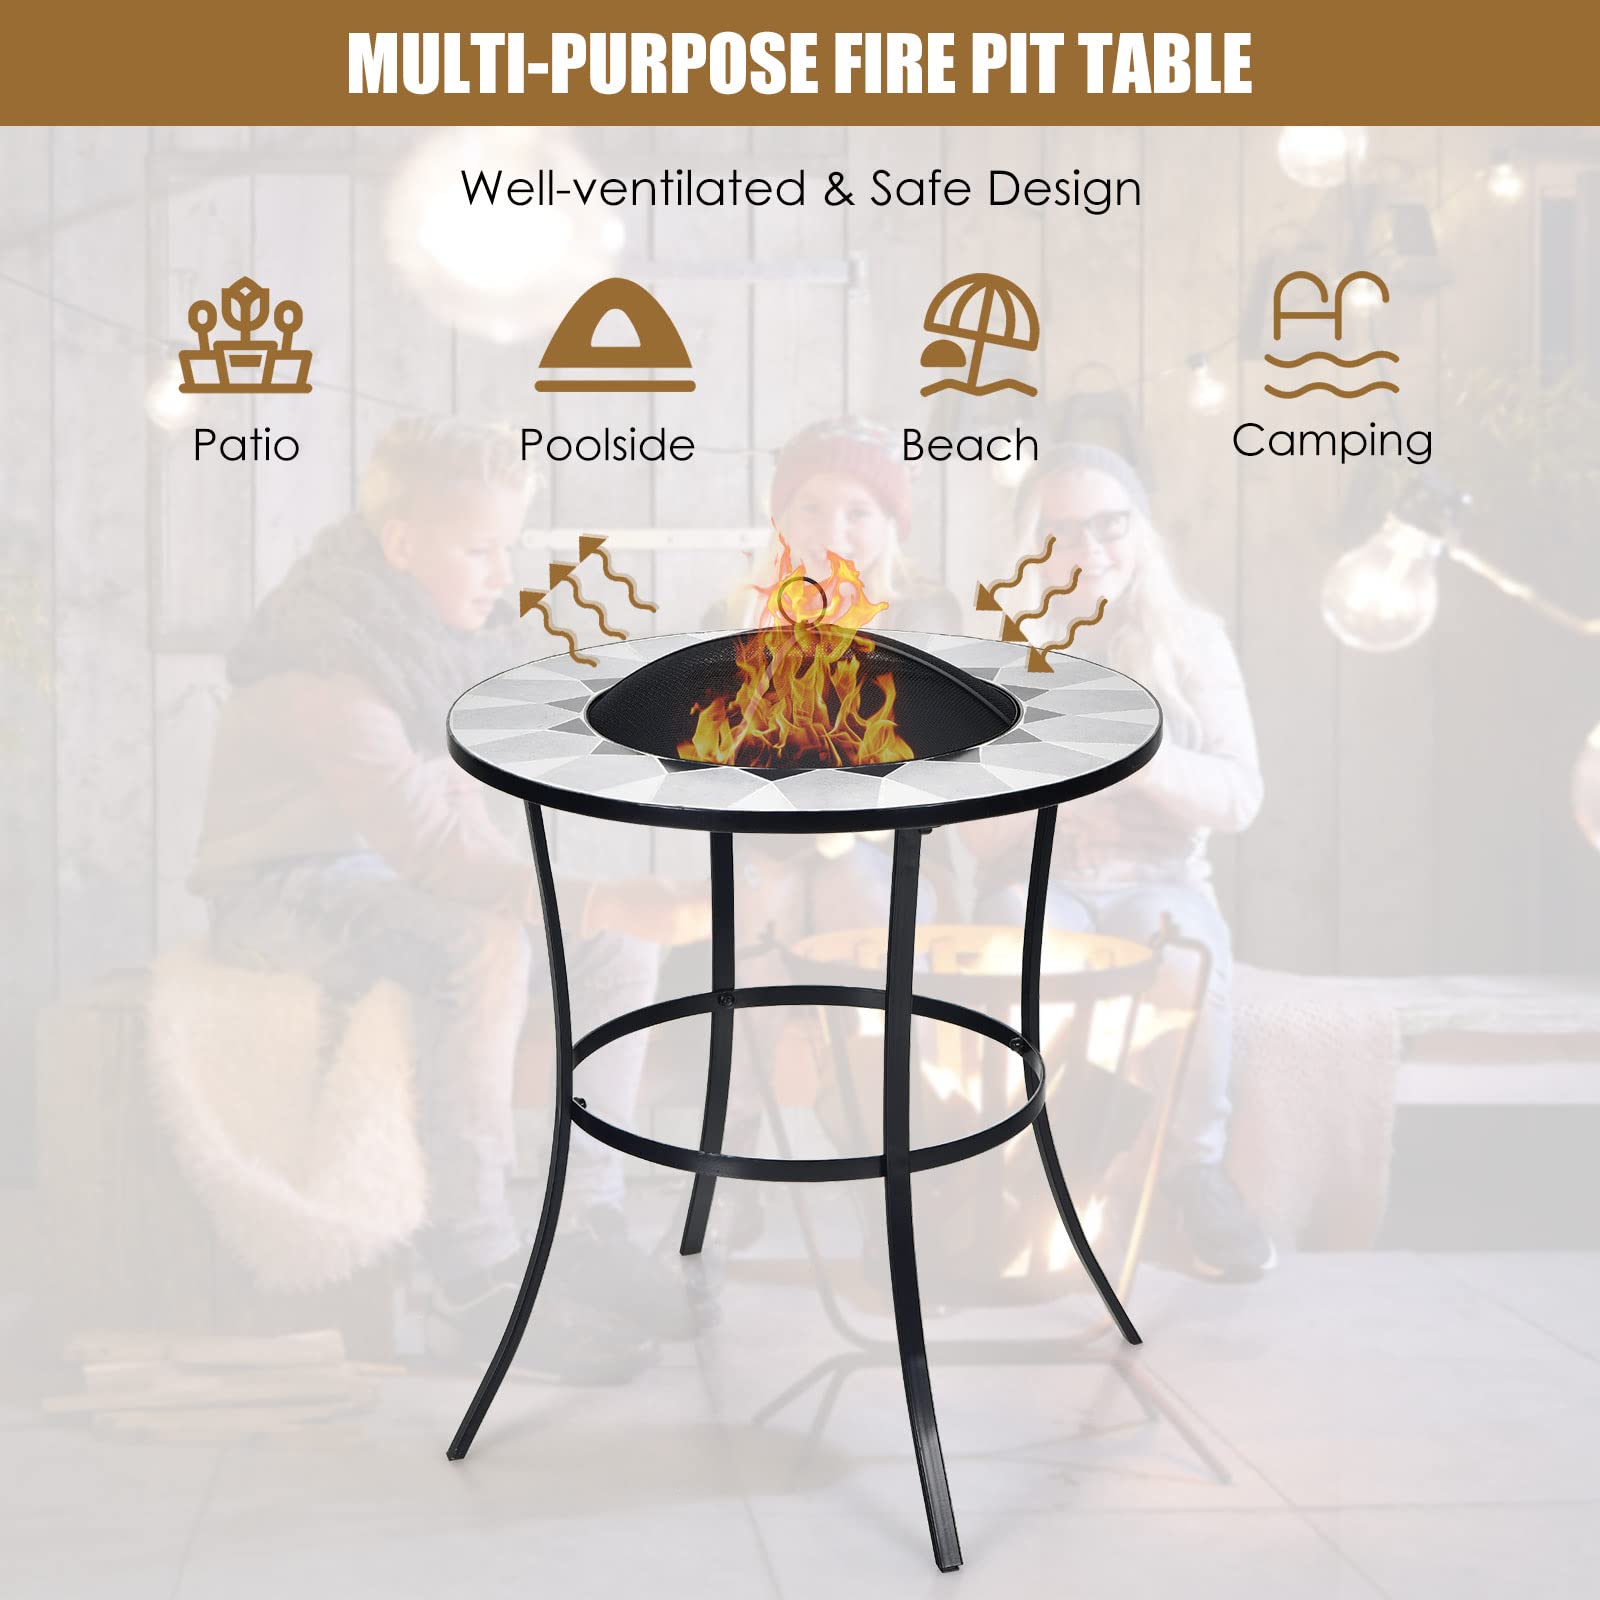 Giantex Fire Pit Table, Outdoor Fire Pit with Mesh Cover, Fire Poker, Tile Tabletop